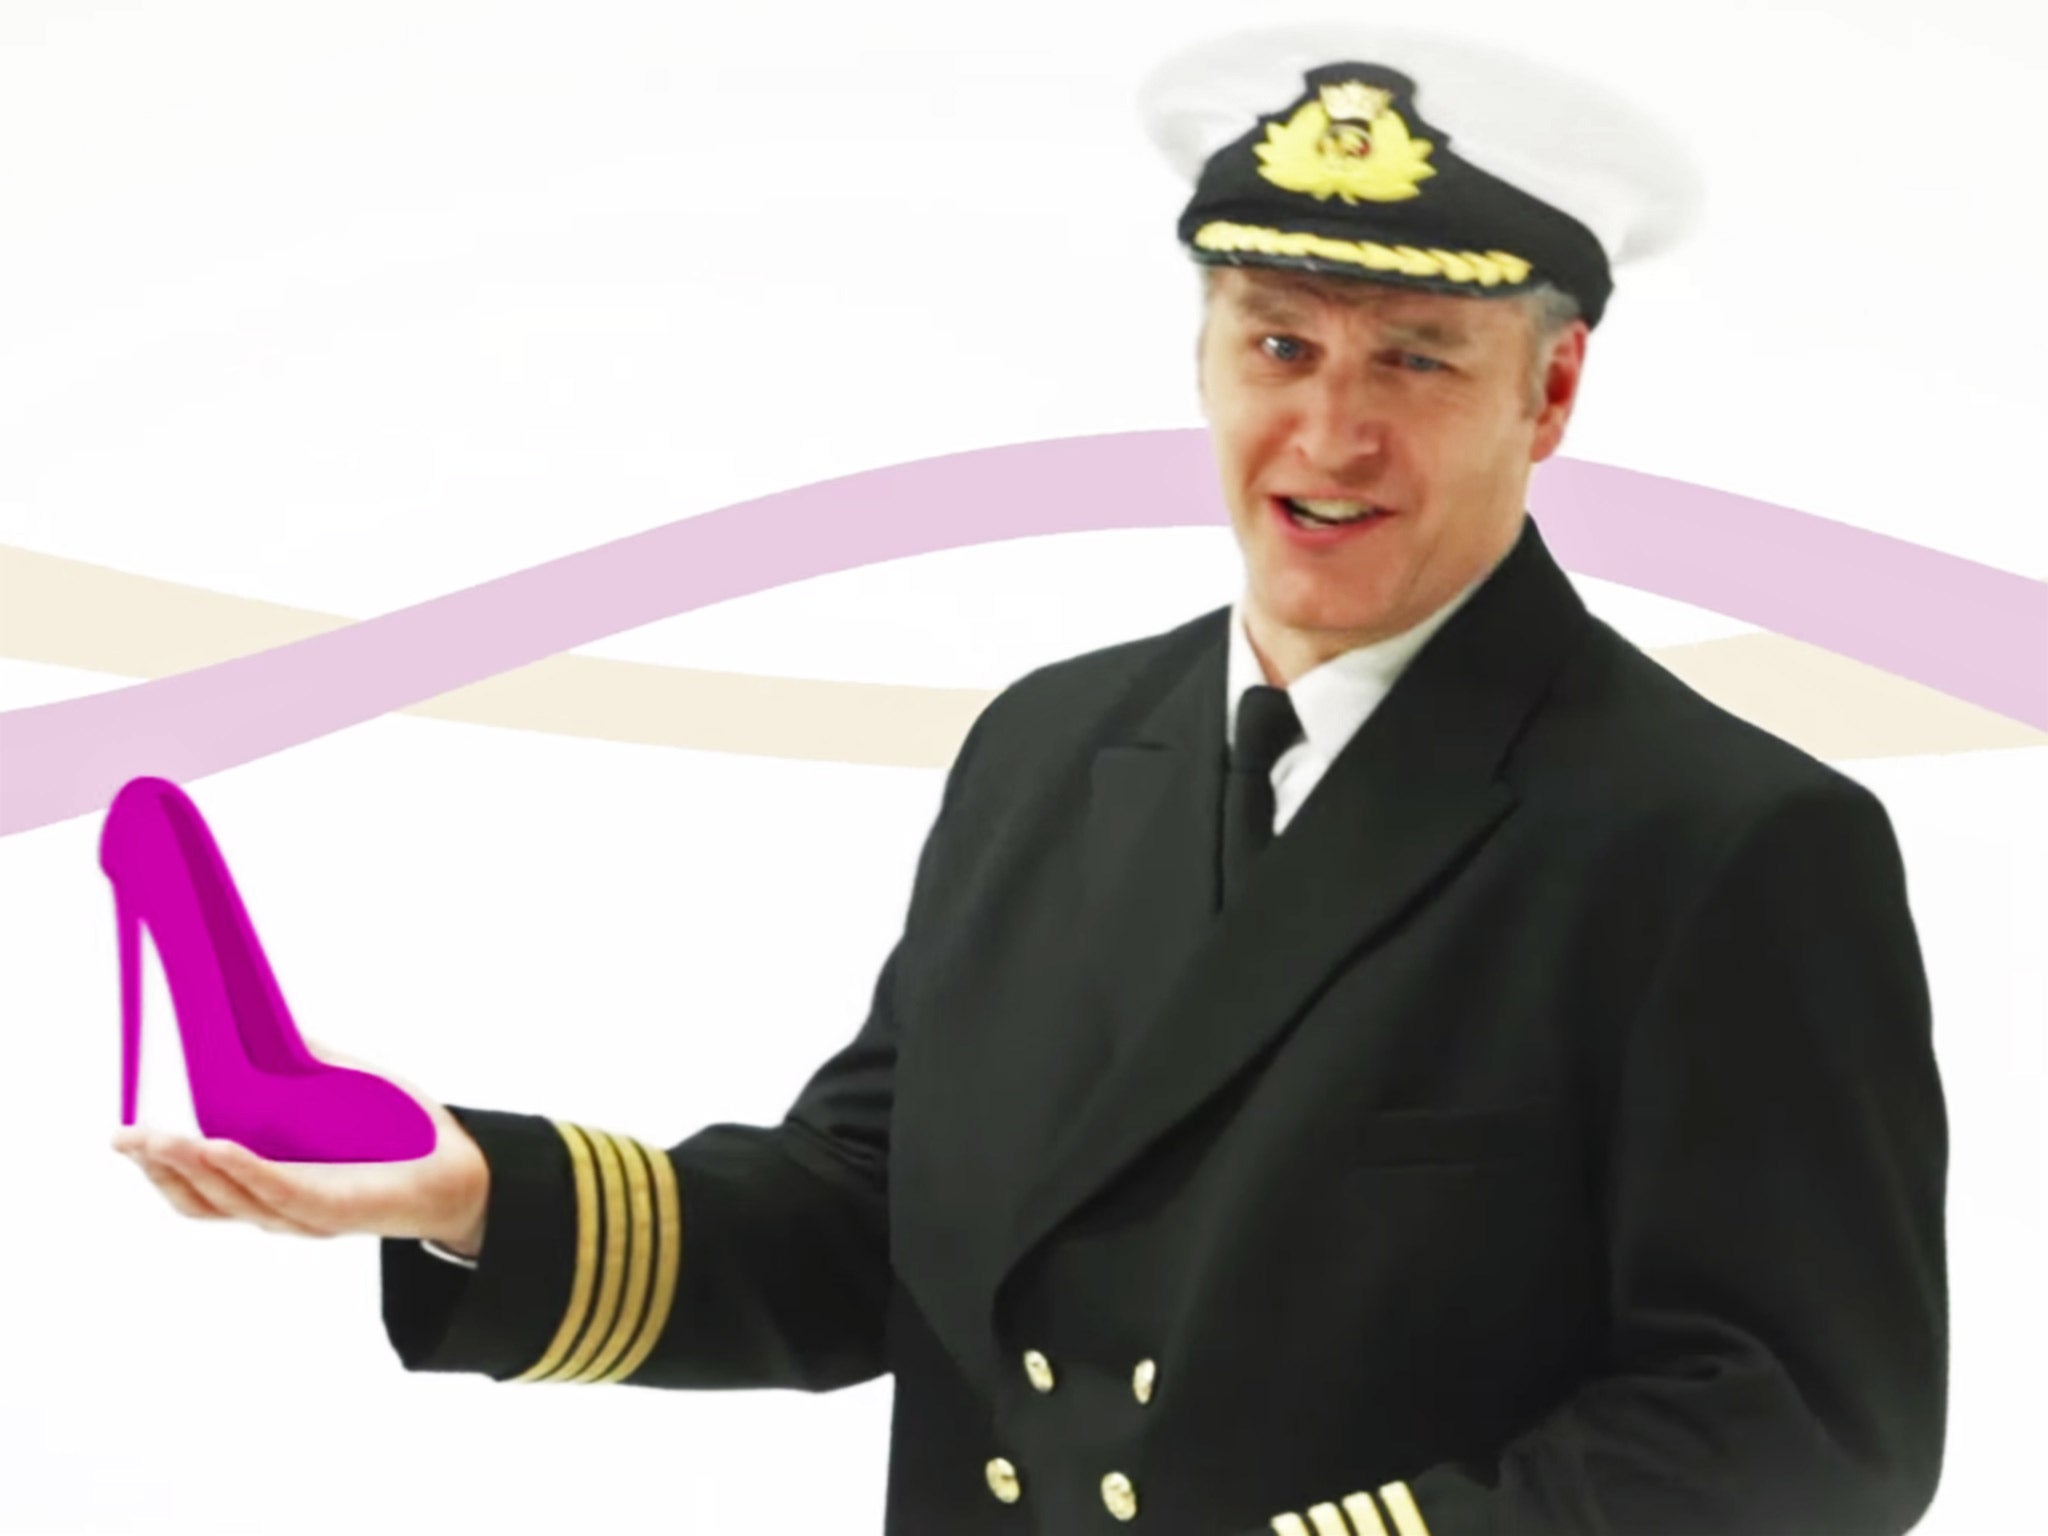 Condor Ferries said they were proud of the video